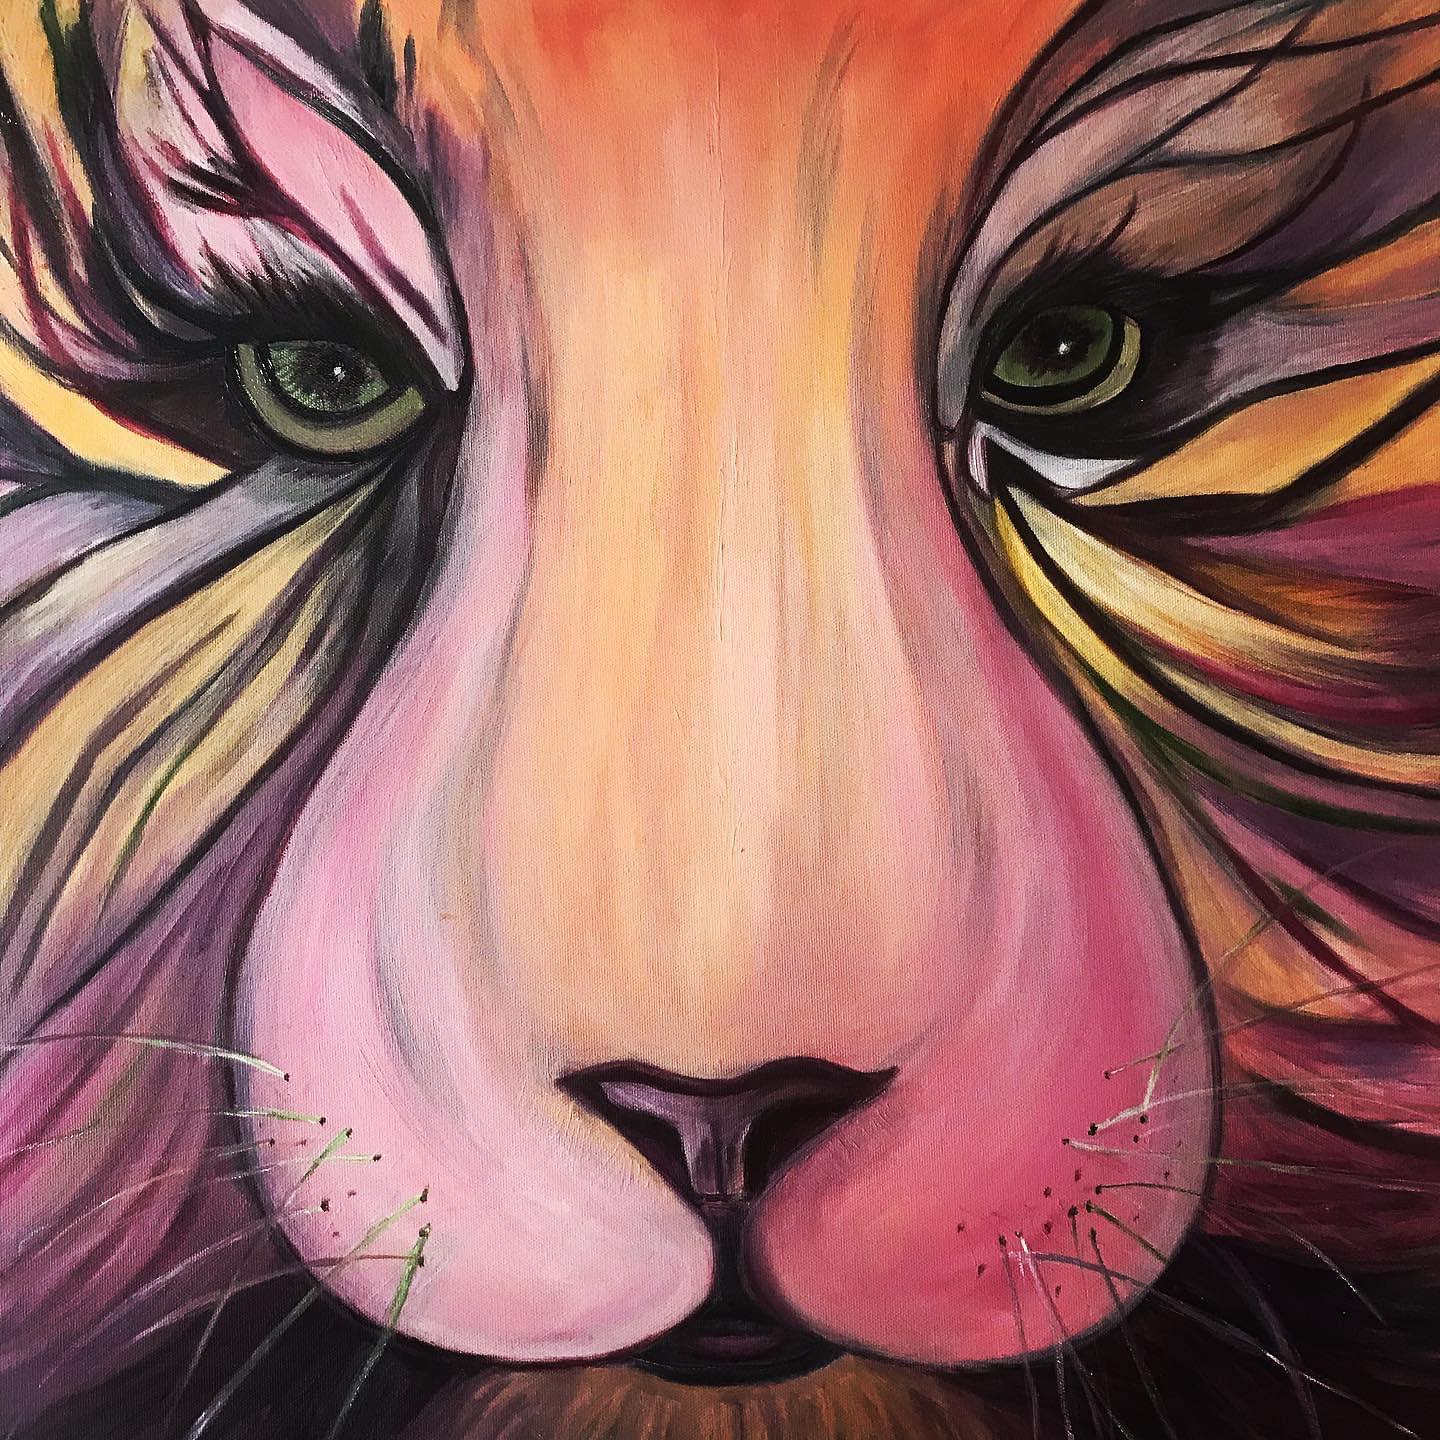 The face of a painted lion